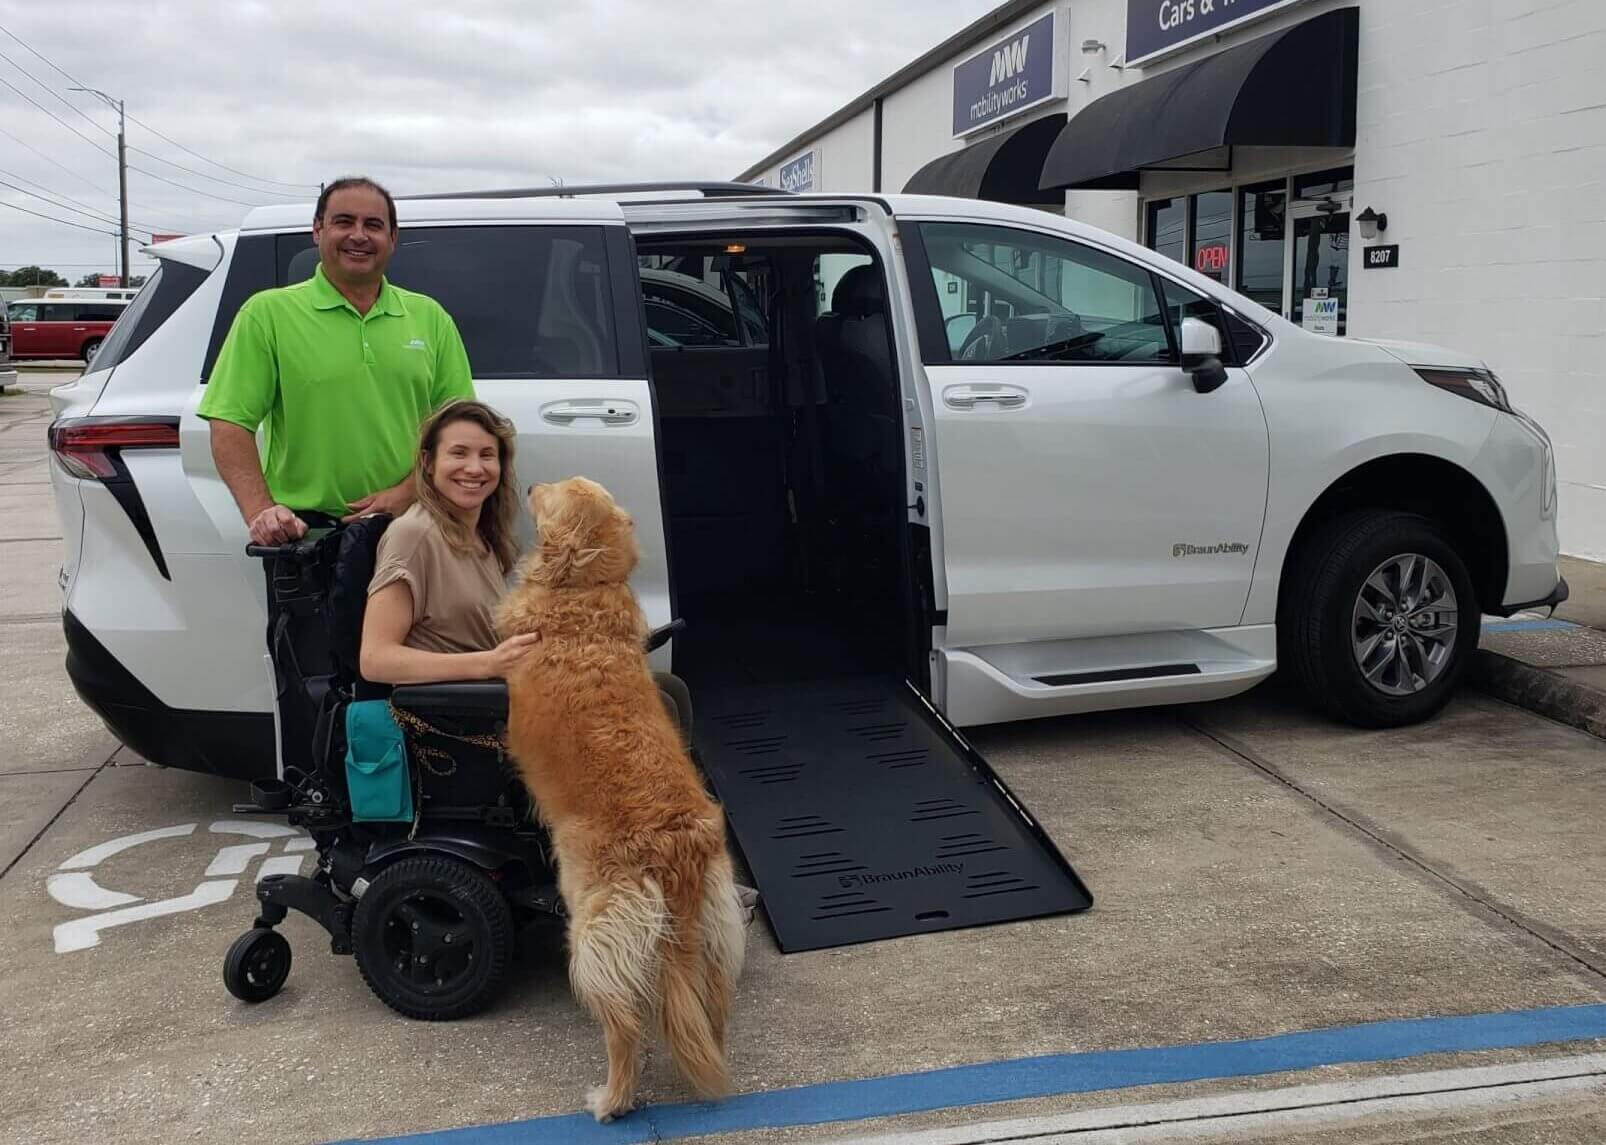 Paul with a happy customer and a dog!